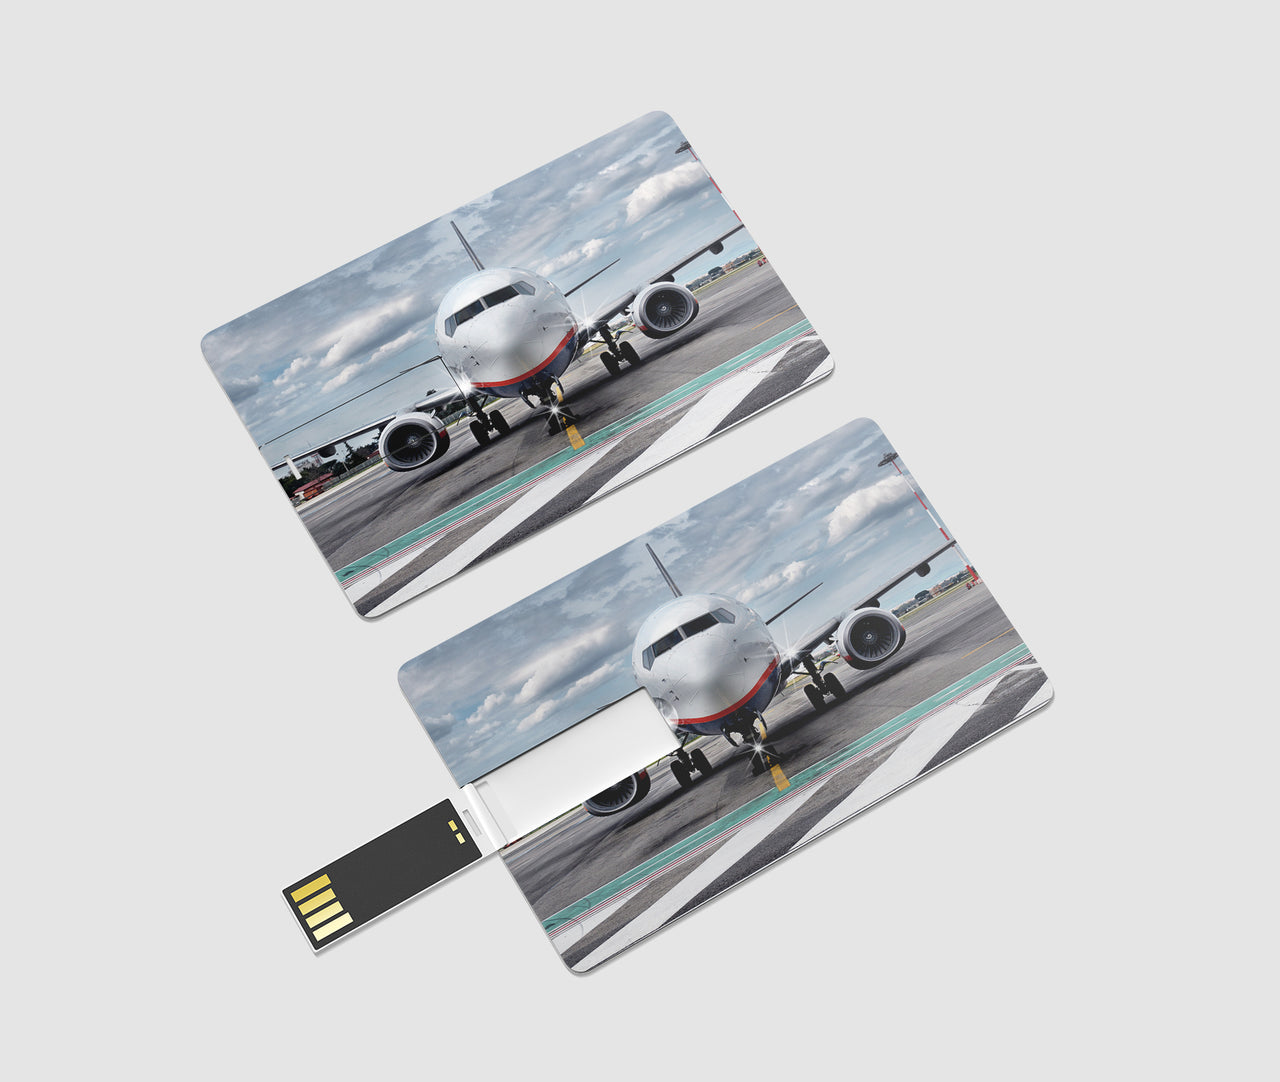 Amazing Clouds and Boeing 737 NG Designed USB Cards